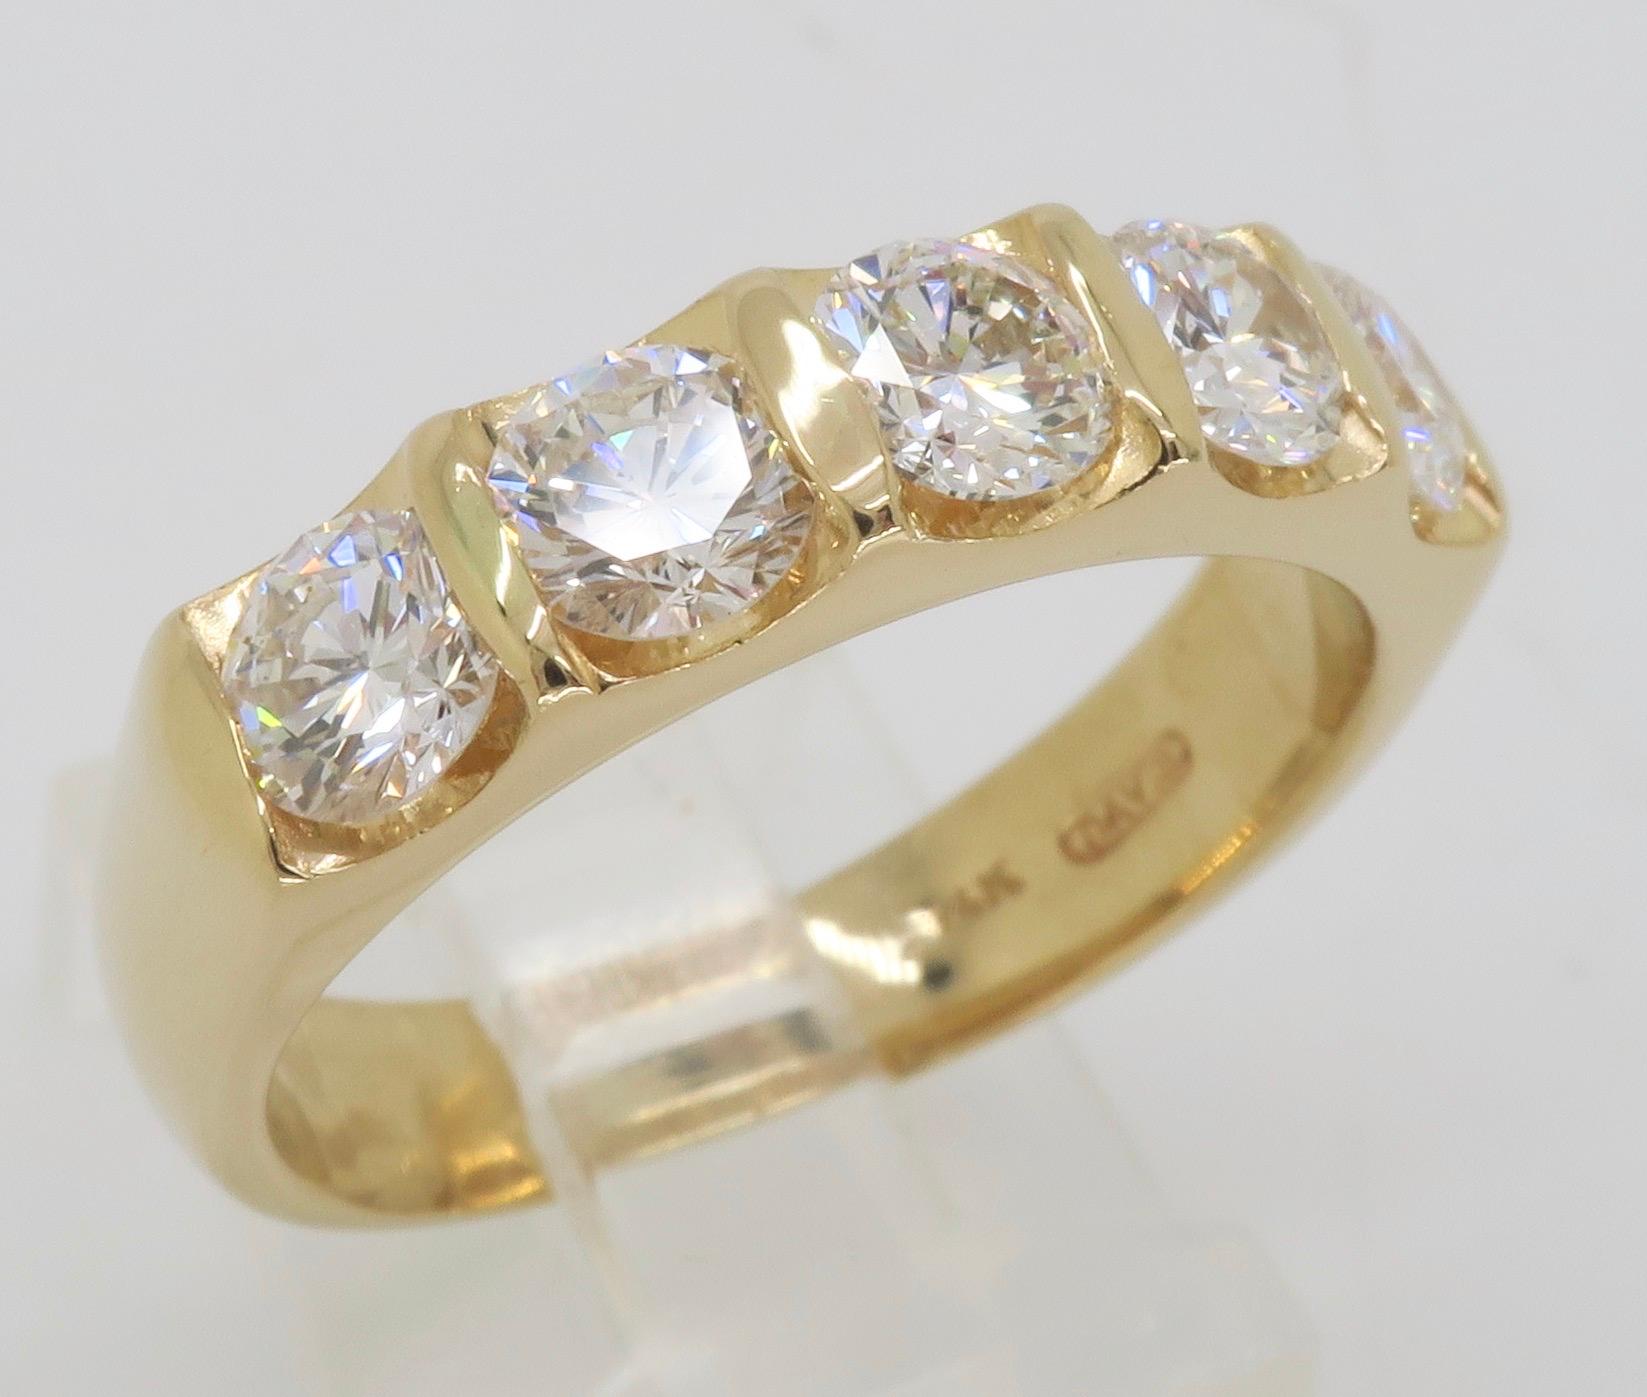 Incredible five stone diamond ring made in 14k yellow gold. 

Diamond Cut: Round Brilliant Cut
Total Diamond Carat Weight: Approximately 1.75CTW
Average Diamond Color: F-H
Average Diamond Clarity: VS
Metal: 14k yellow gold 
Marked: “14k” “DAVIS”